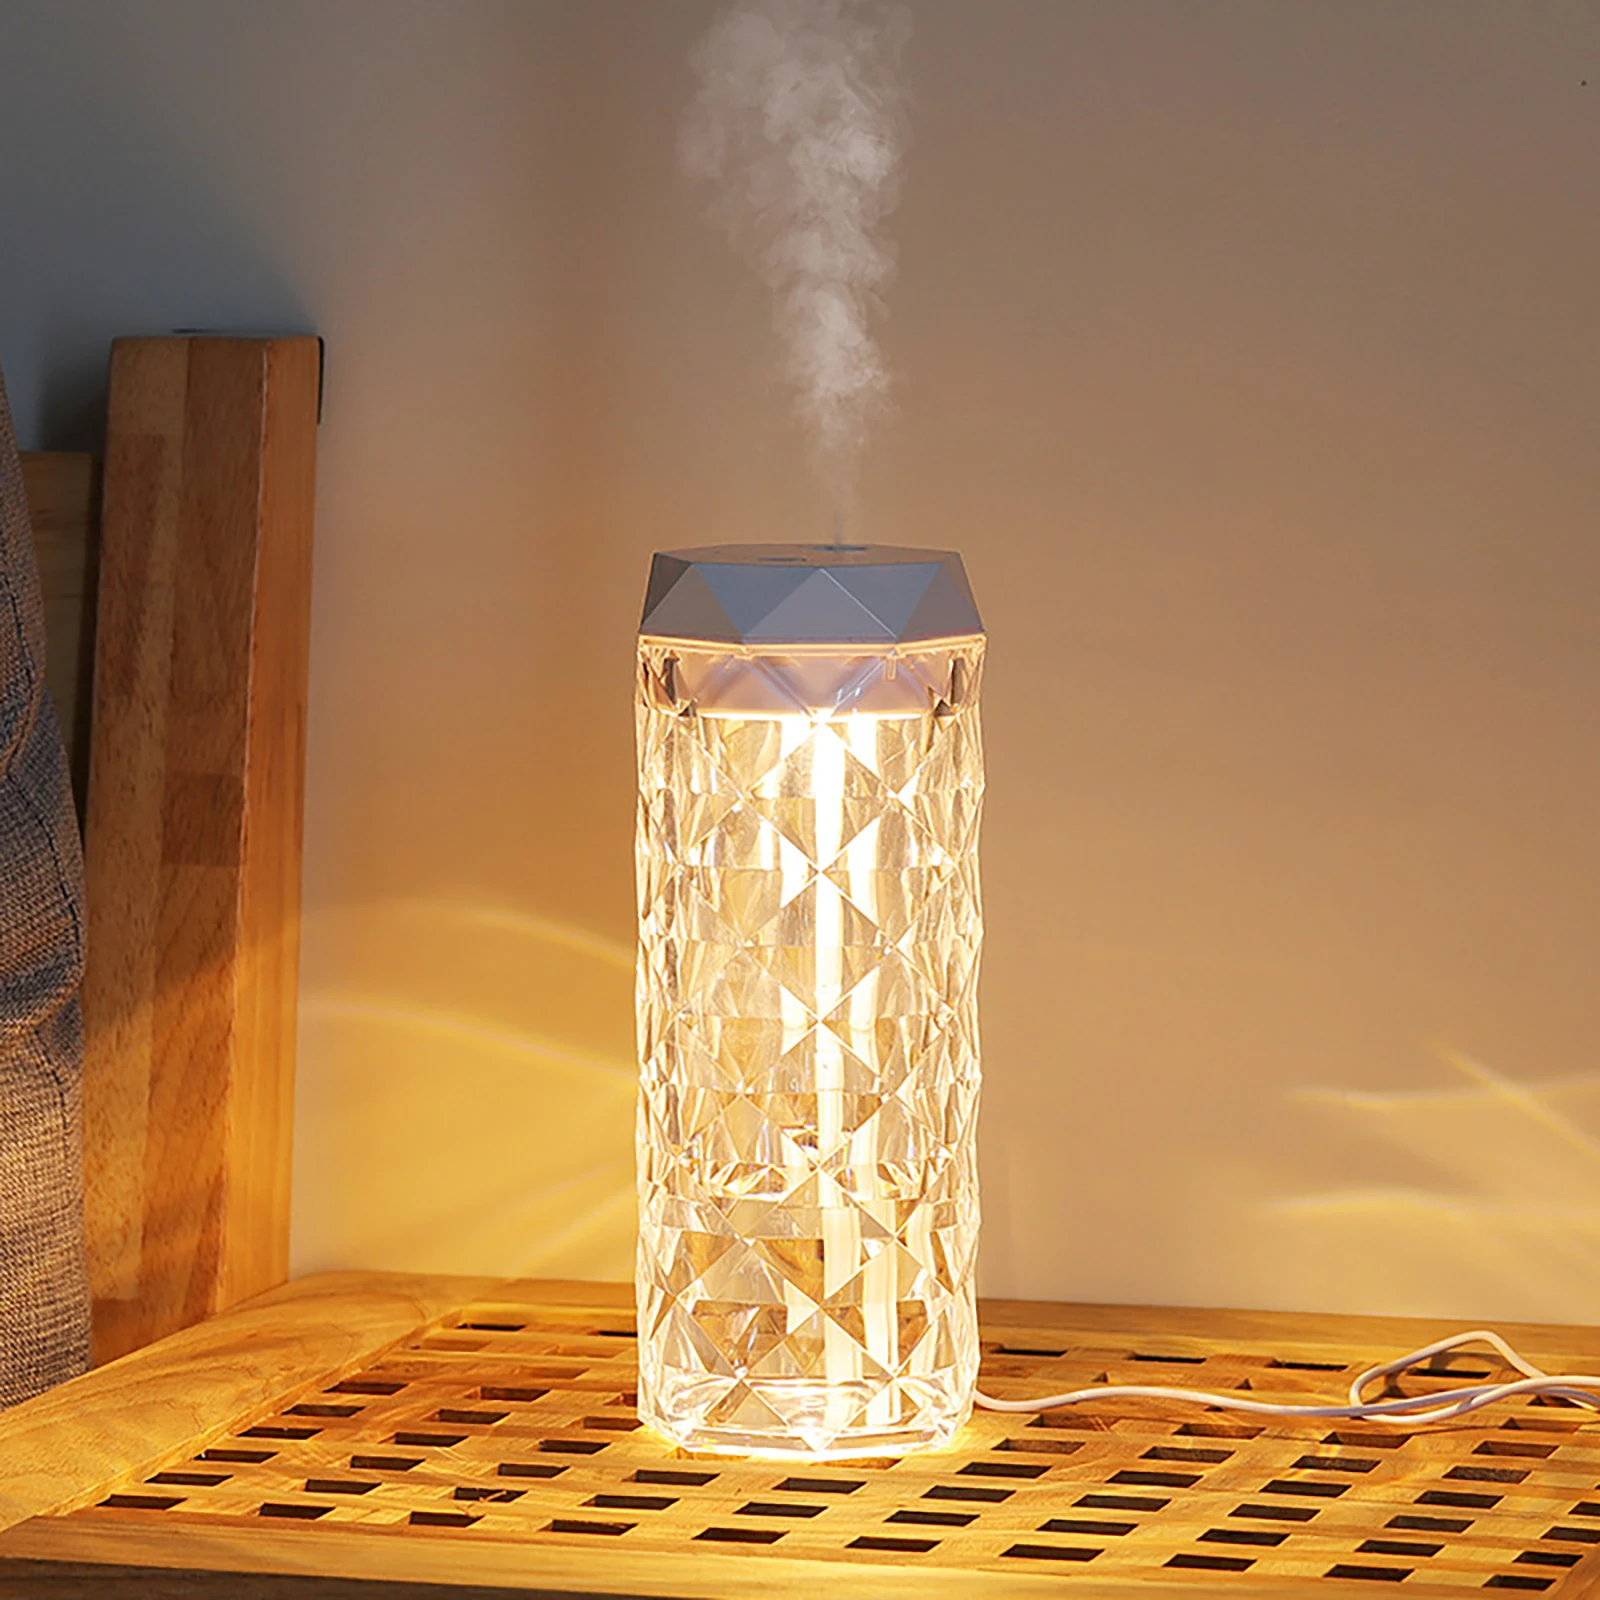 LED Crystal Night Light With Air Humidifier Romantic Dimming Diamond USB Table Lamp Home Decoration Aromatherapy Aroma Diffuser